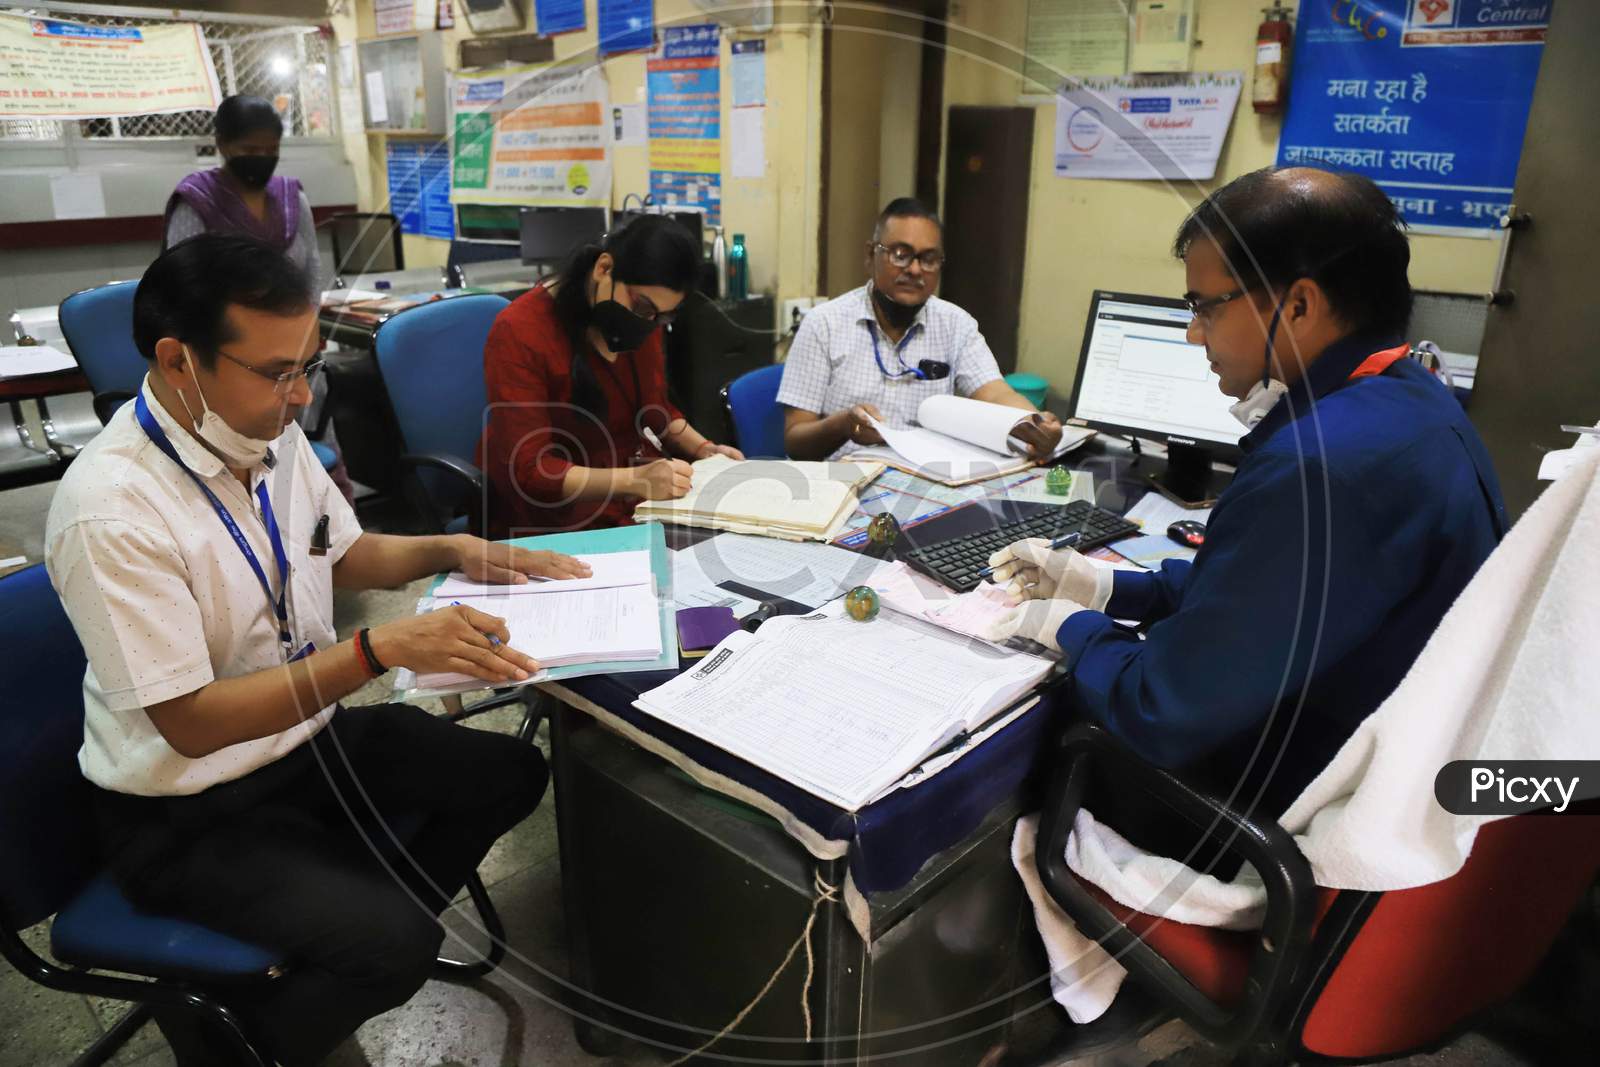 Bank Employees Busy Auditing Inside A Bank During A Nationwide Lock down To Slow The Spreading Of The Corona virus Disease (Covid-19), In Prayagraj, April, 16, 2020